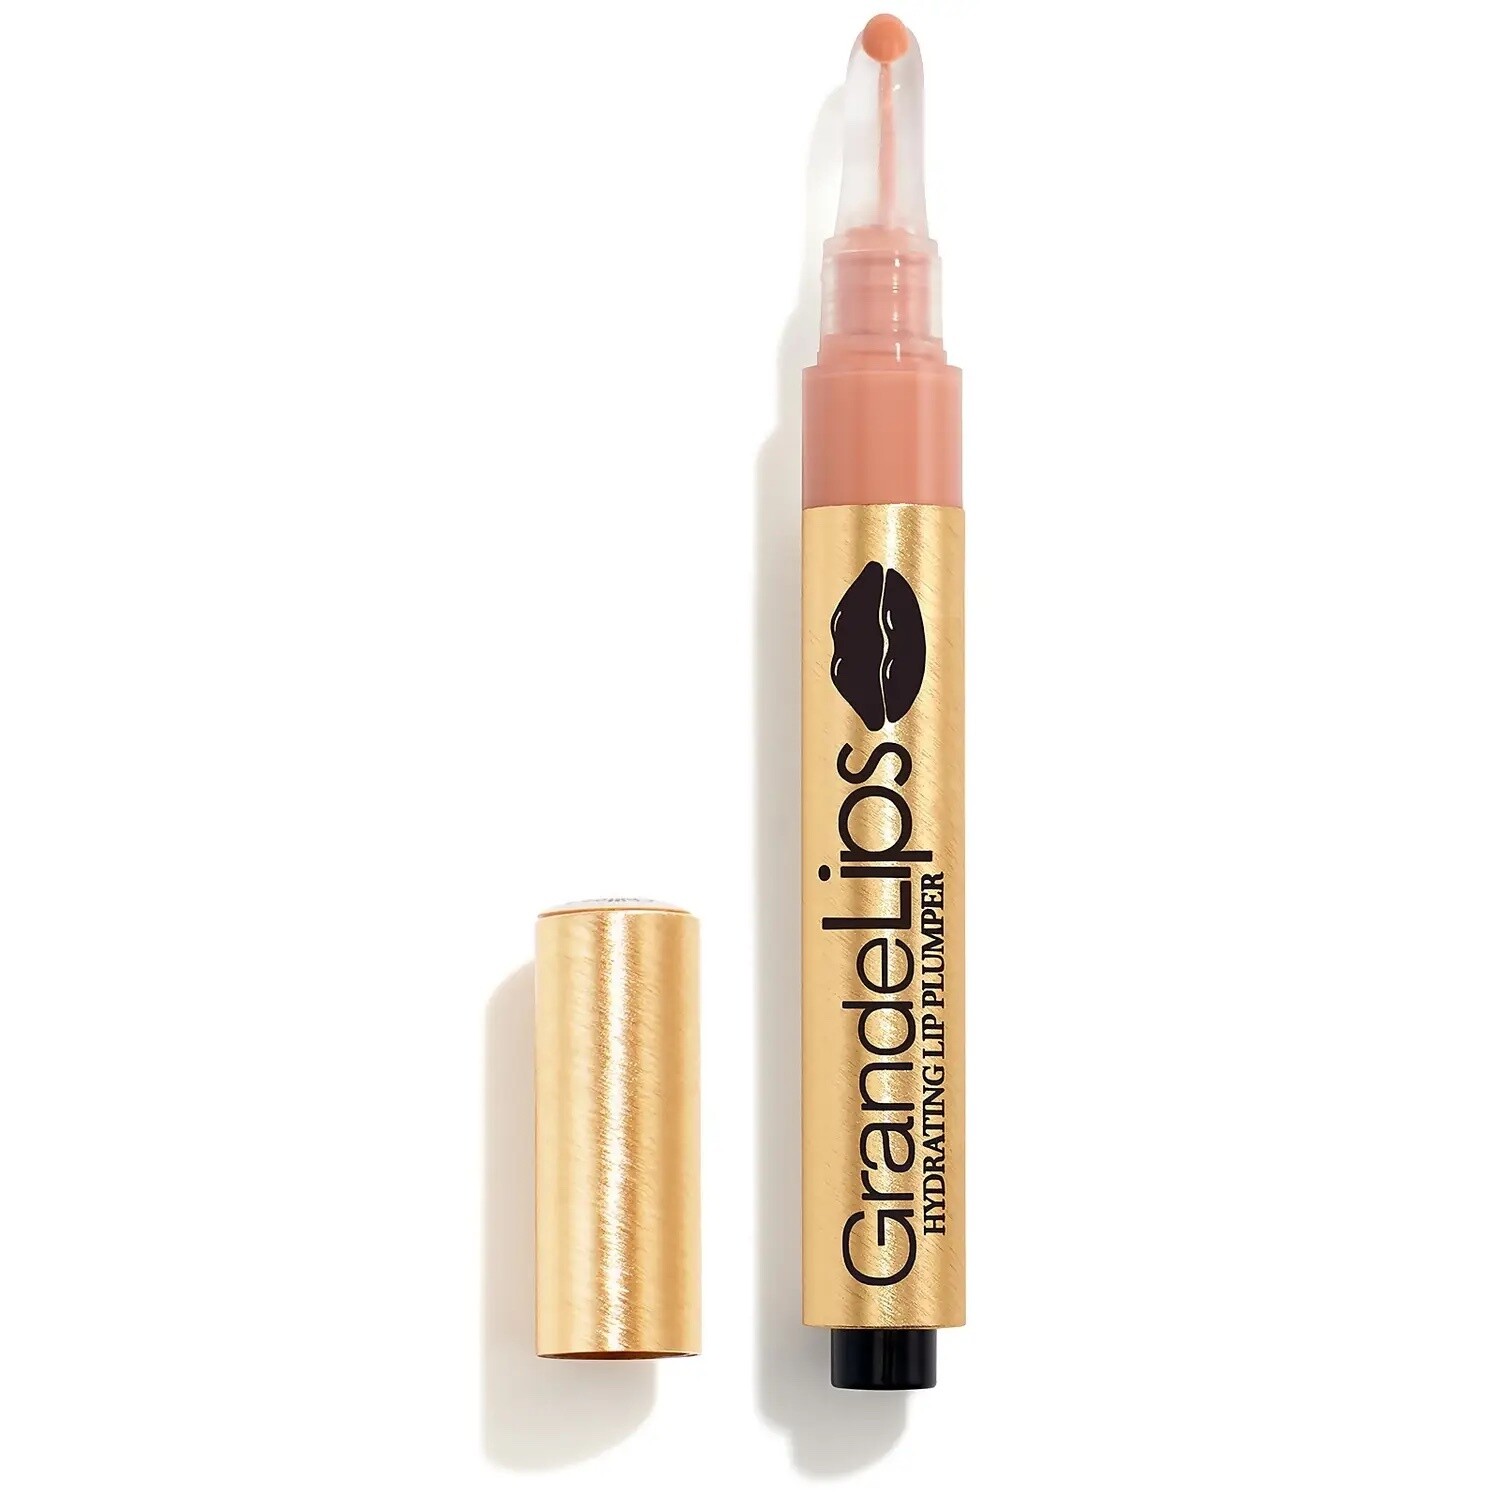 Grandelips -Gloss Toasted Apricot